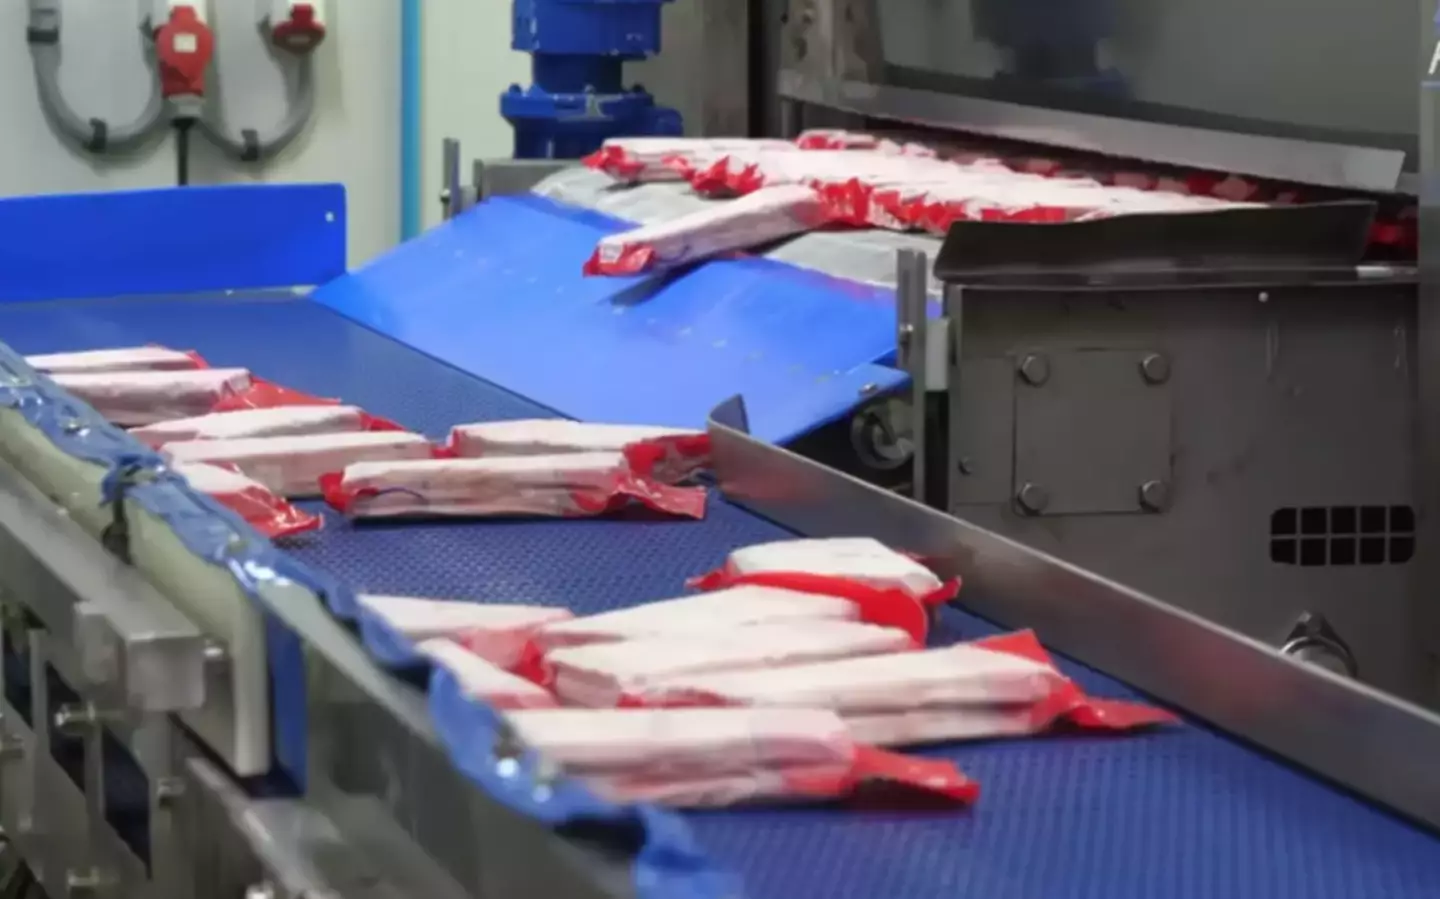 Crabsticks are a beloved snack but do you know how they're made? (YouTube/Food Kingdom)